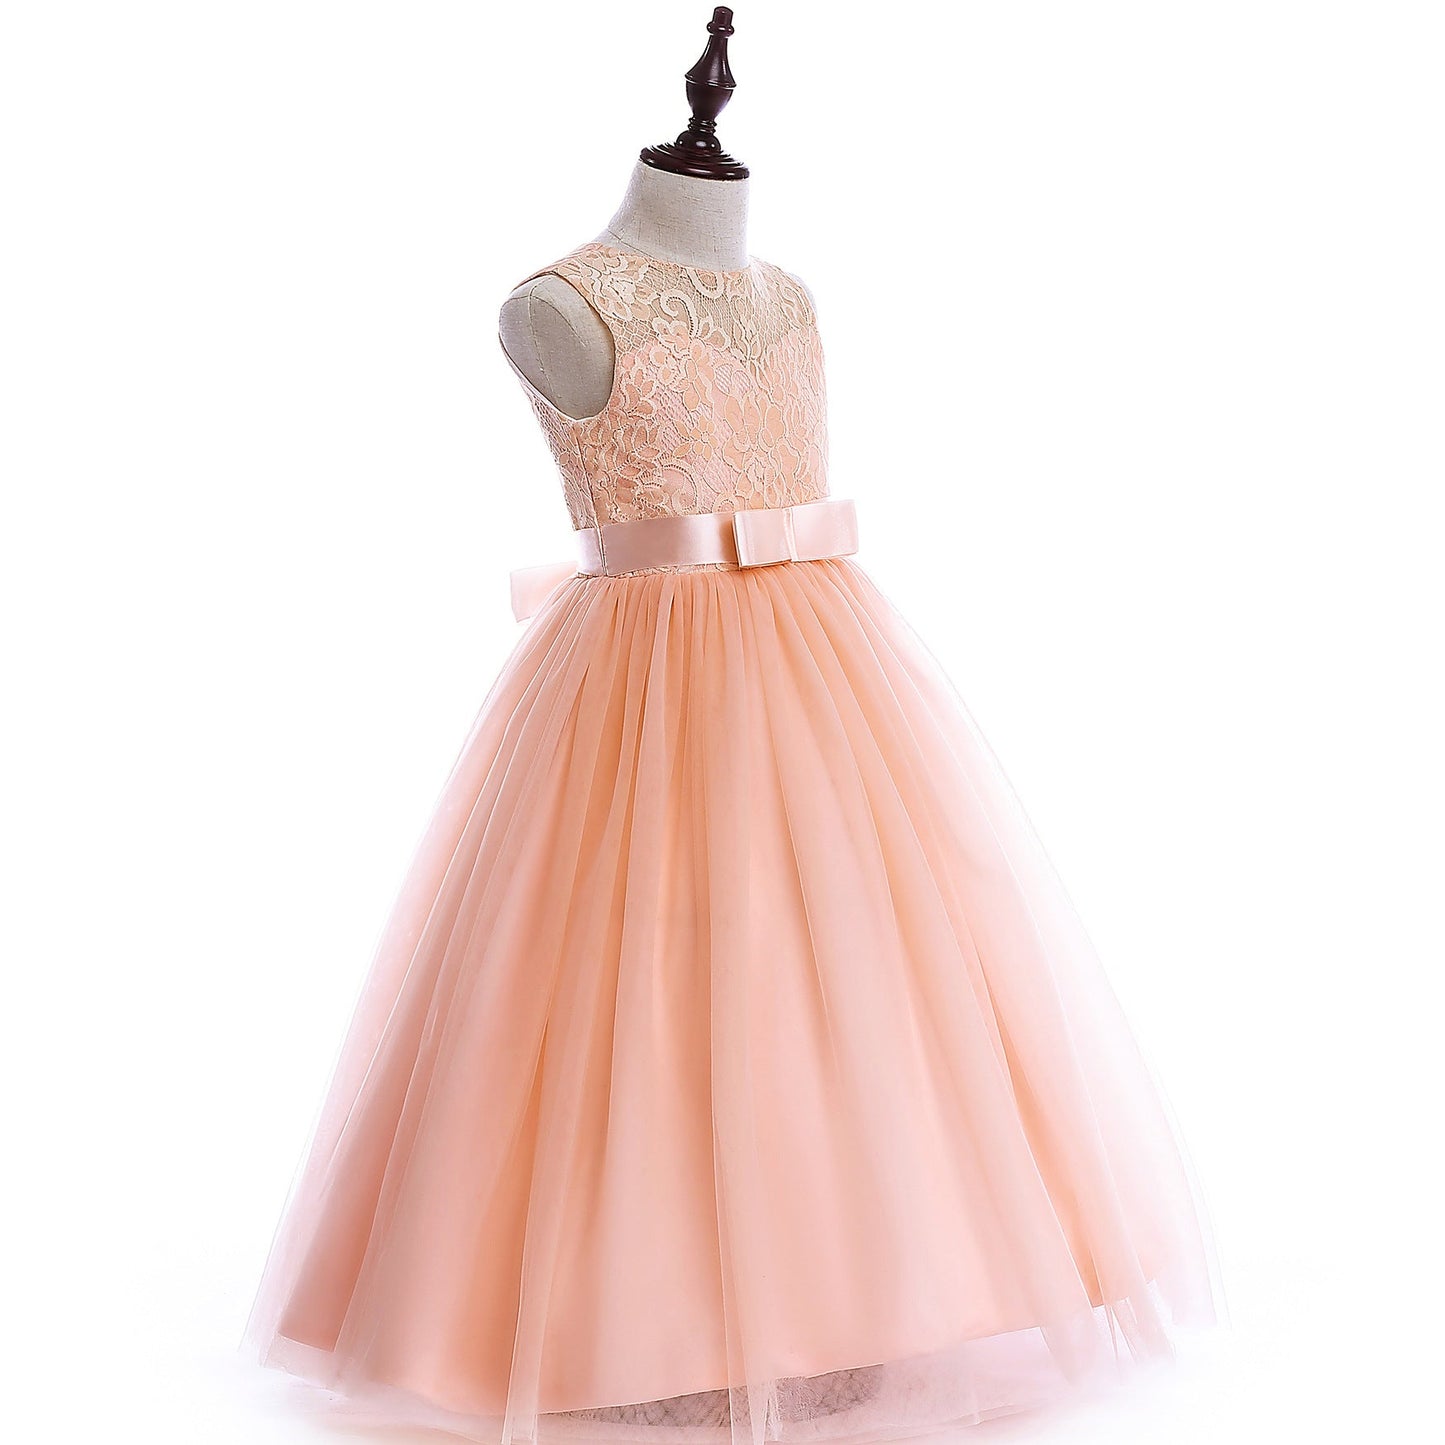 Girls special occasion dress - Adorable Attire